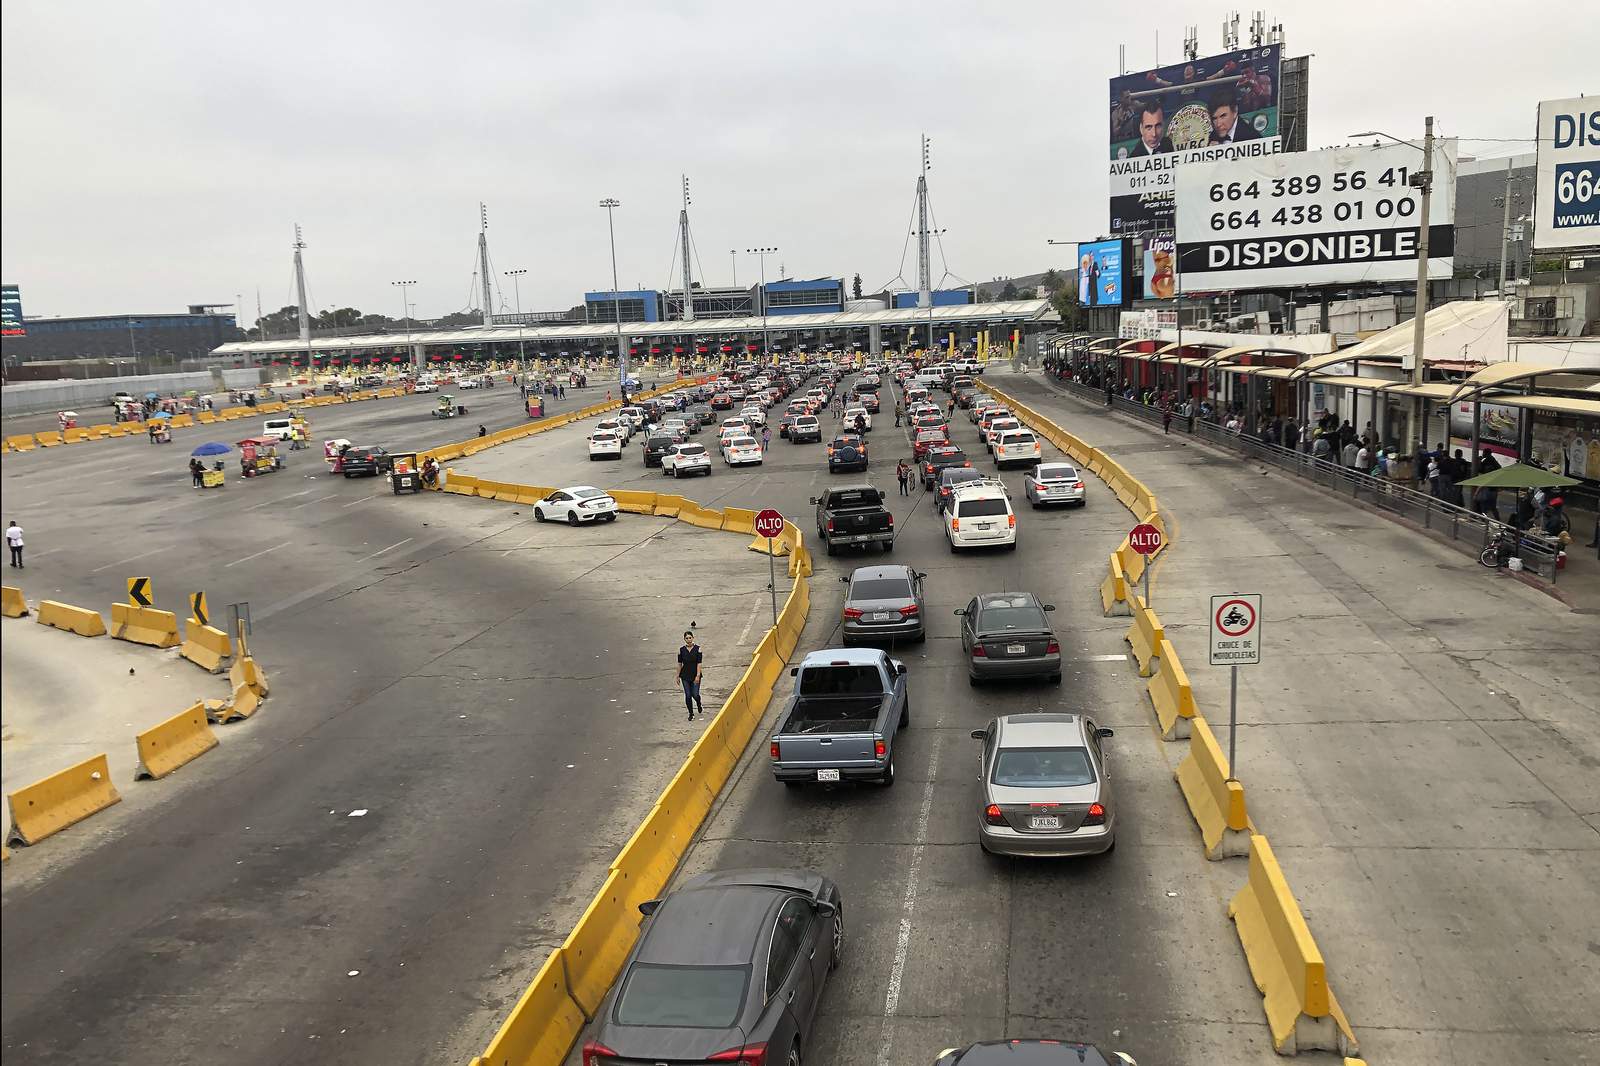 US crackdown on nonessential border travel causes long waits